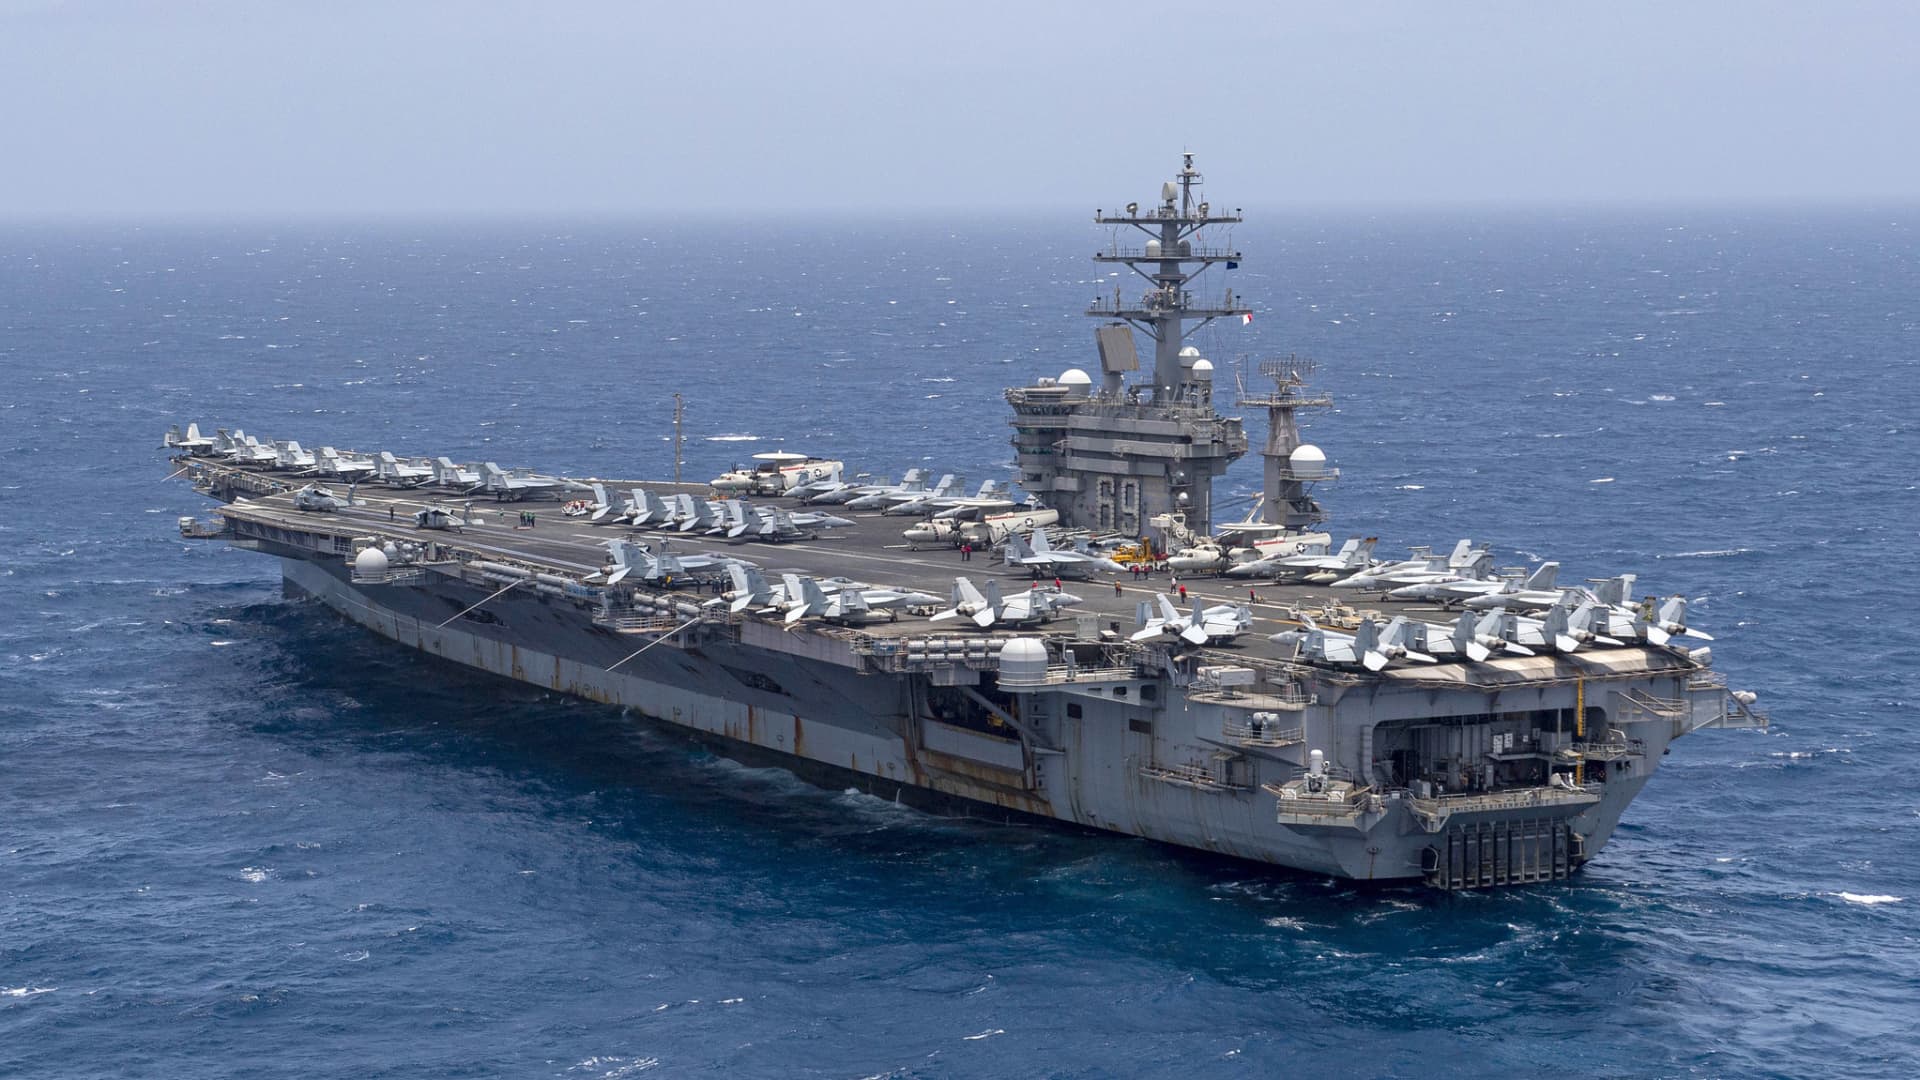 Onboard a U.S. aircraft carrier, a cat-and-mouse game with Houthi forces plays out